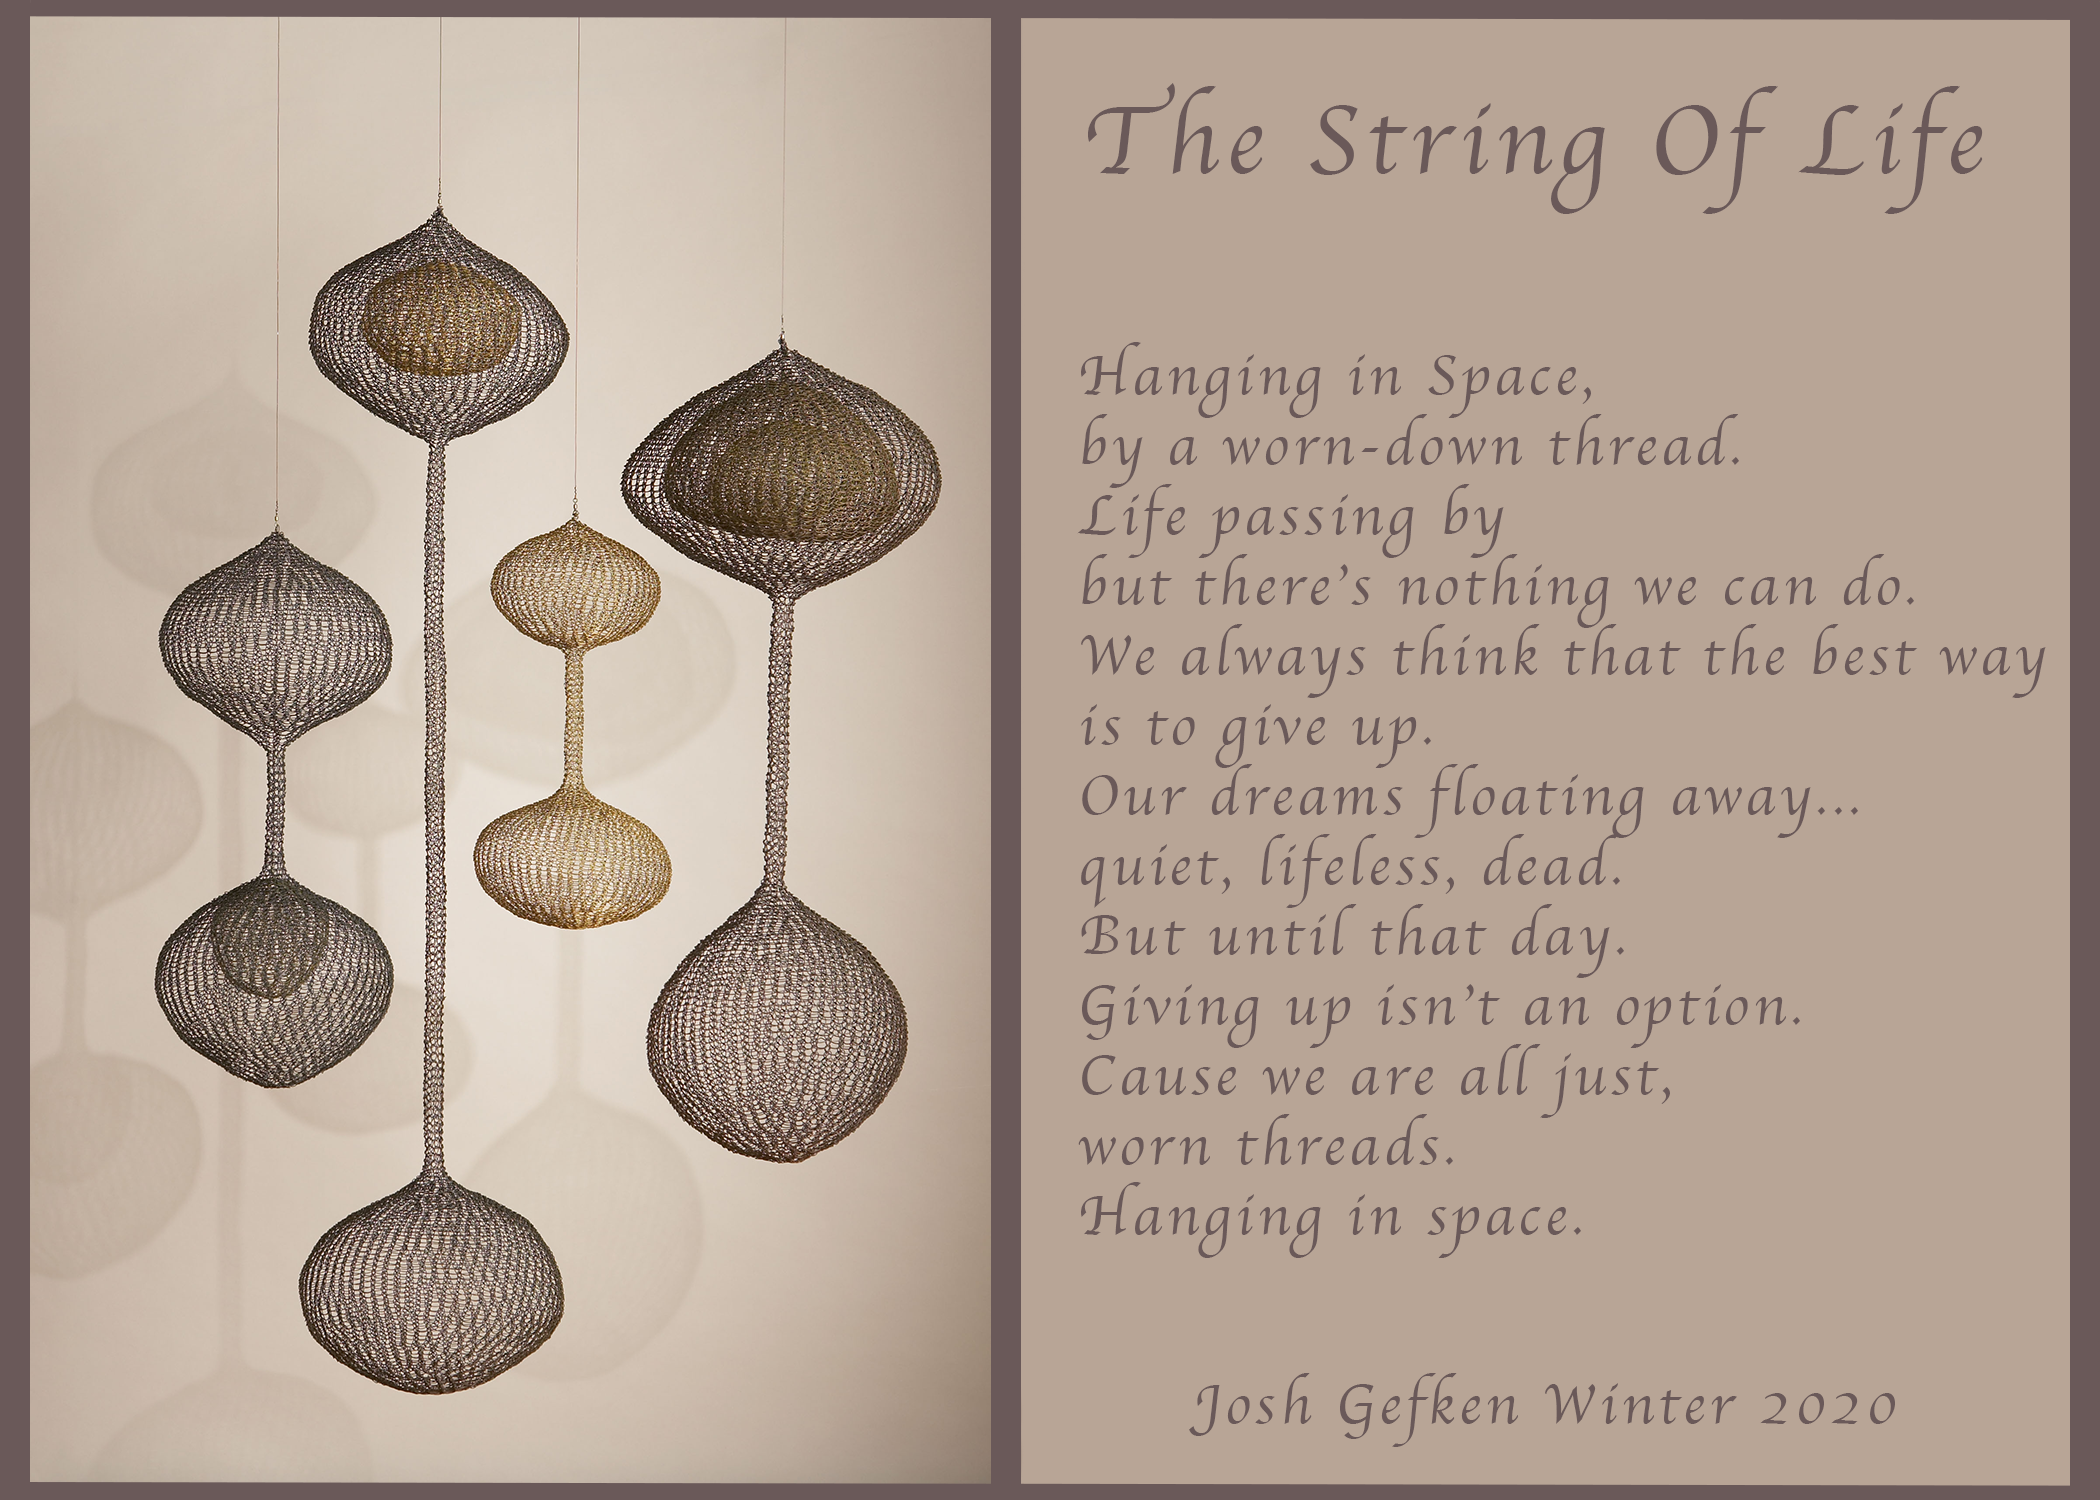 The String of Life